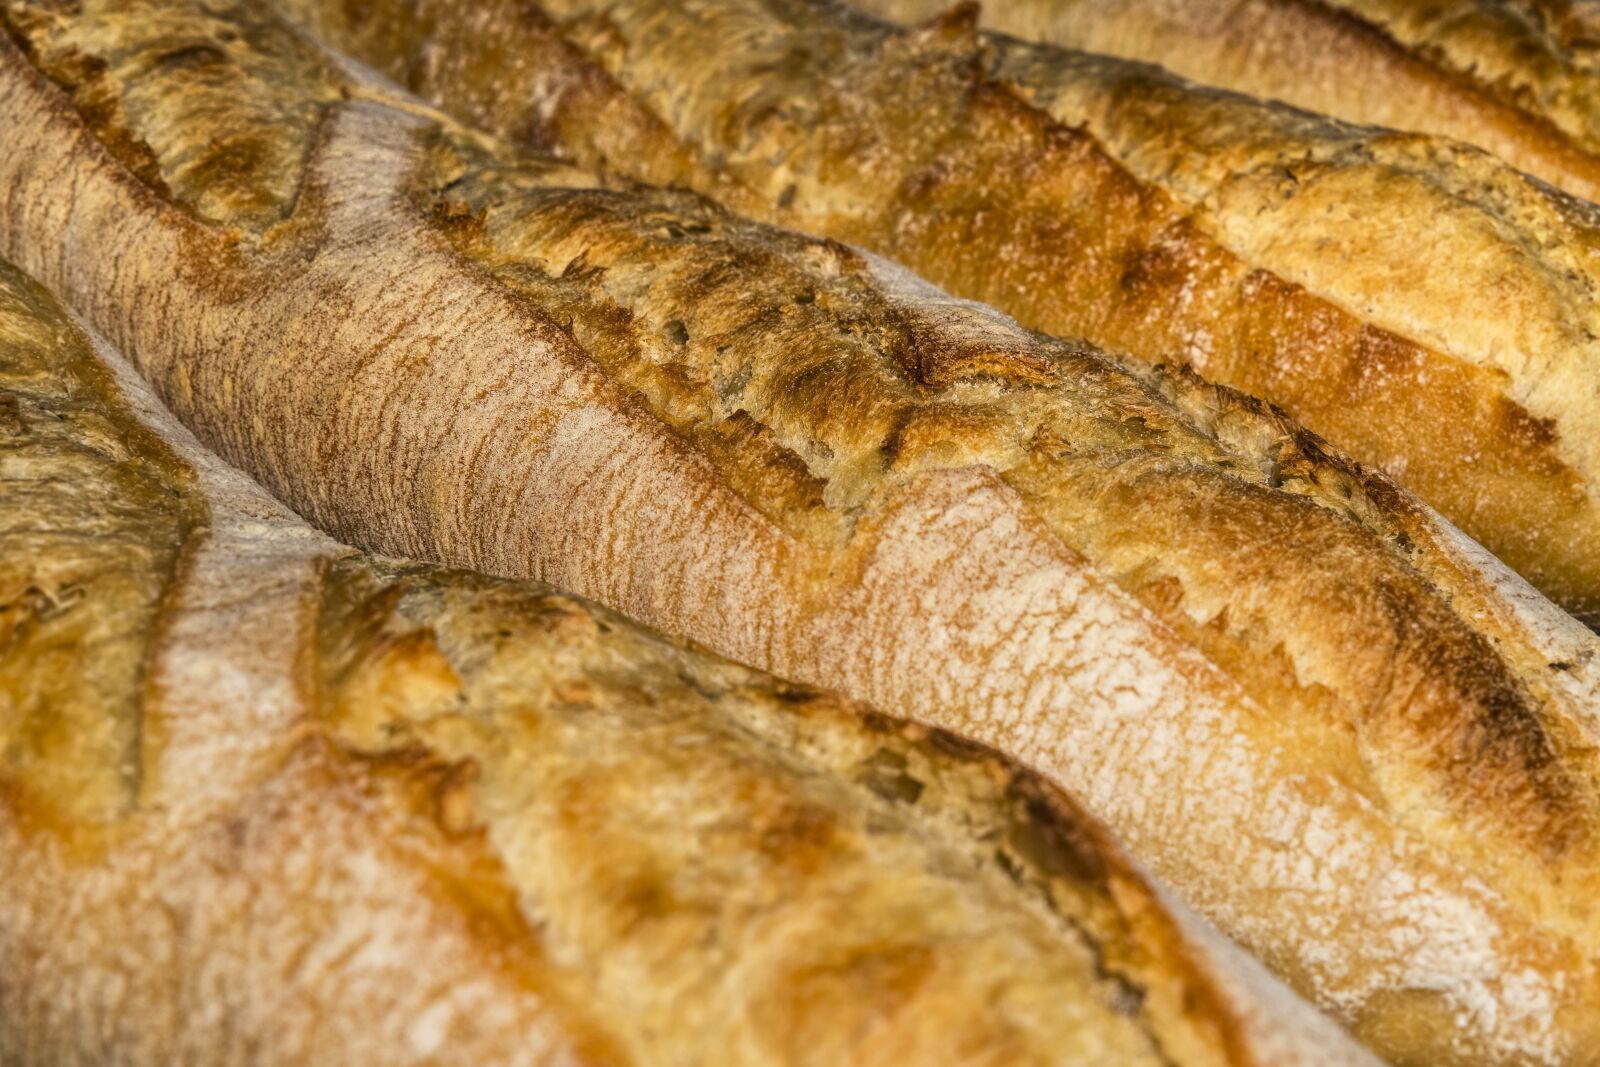 Sony a6300 sample photo. Baguette, bread, food photography